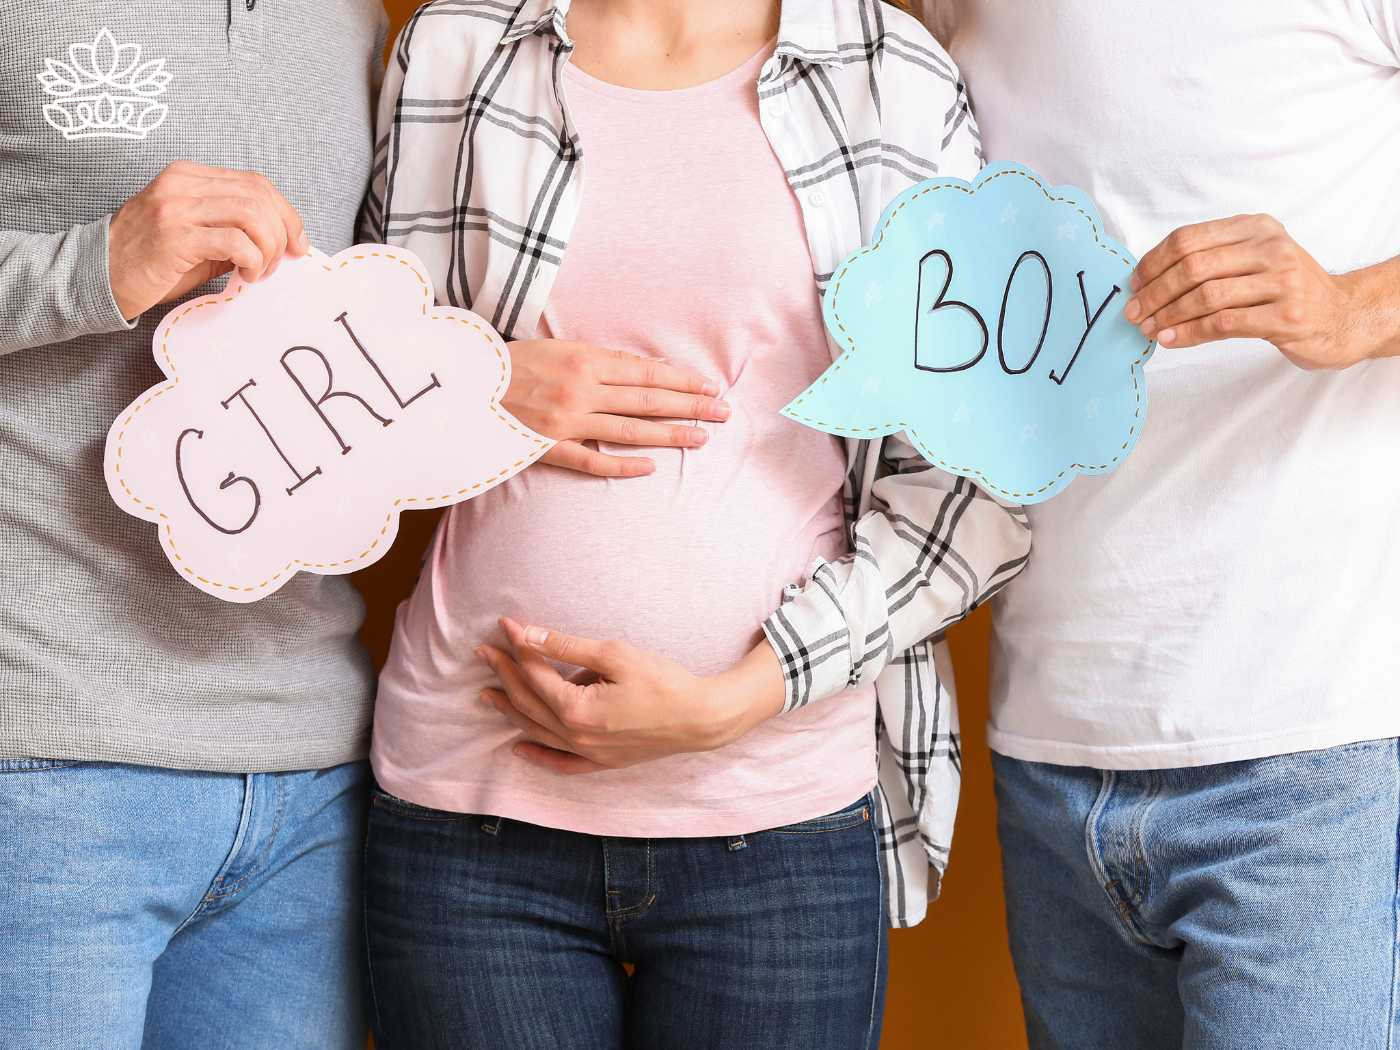 A pregnant woman holding her belly, flanked by two people holding 'GIRL' and 'BOY' signs, from the Gender Reveal Collection at Fabulous Flowers and Gifts.